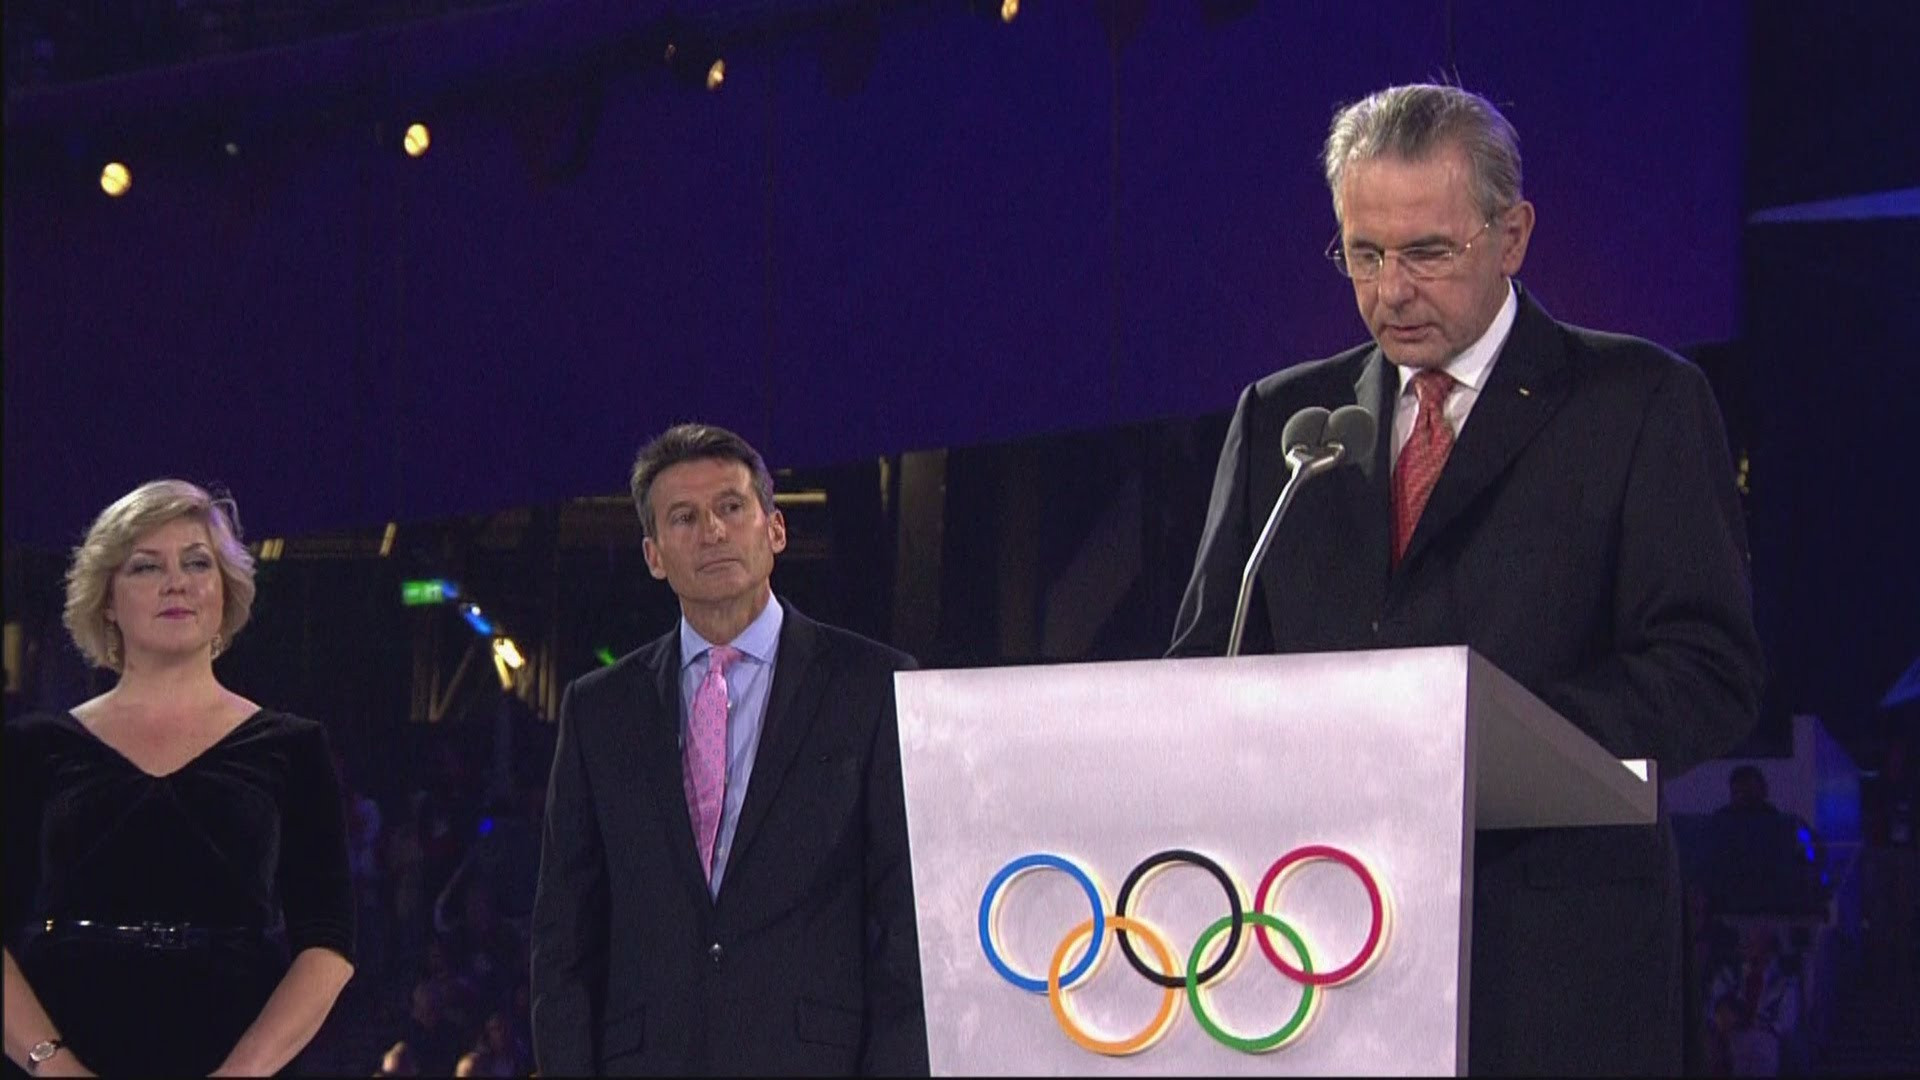 IOC President Jacques Rogge resisted the temptation to declare London 2012 the 